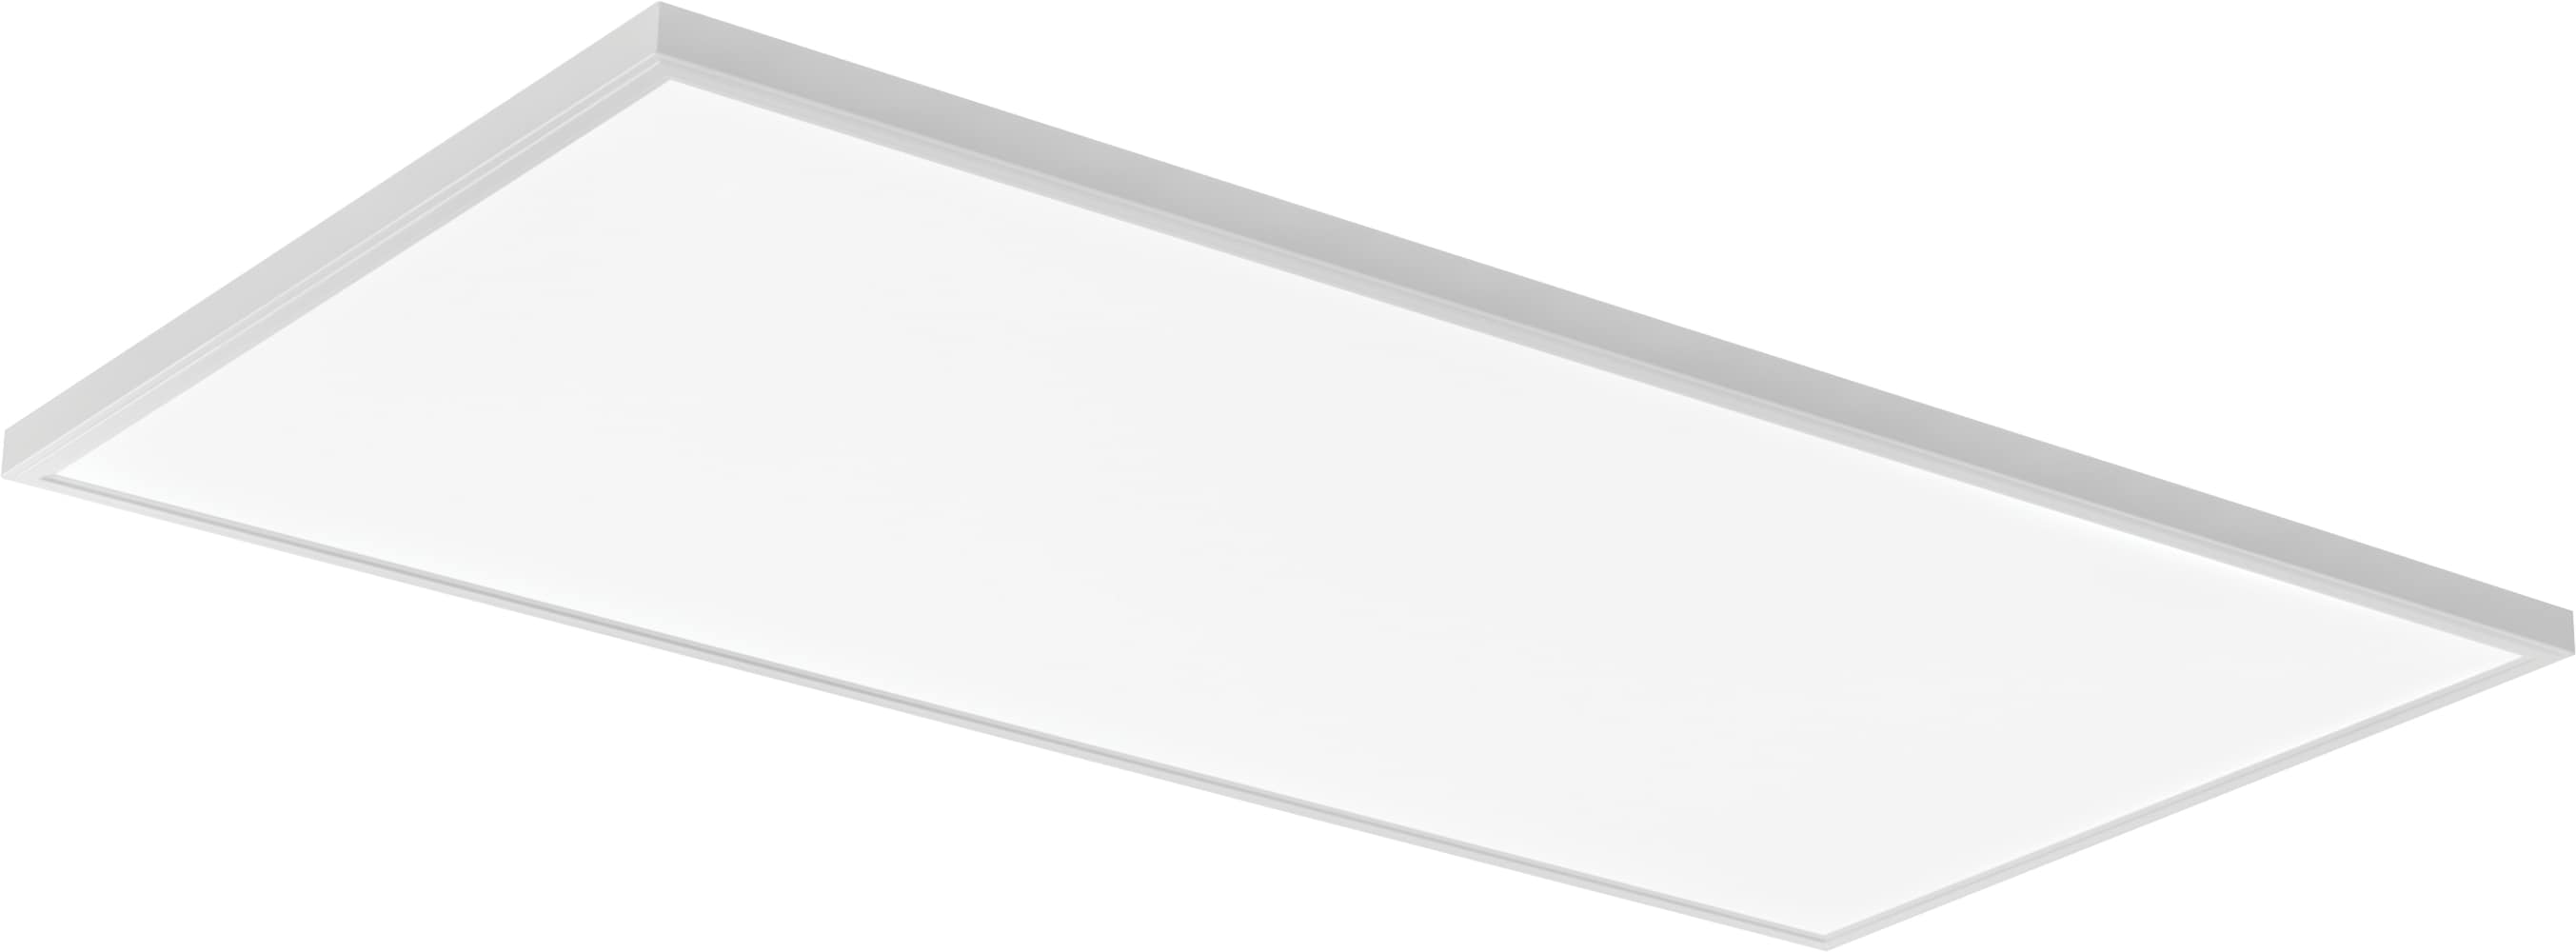 Lithonia Lighting 2-ft x 4-ft Daylight Light in the LED Lights department at Lowes.com